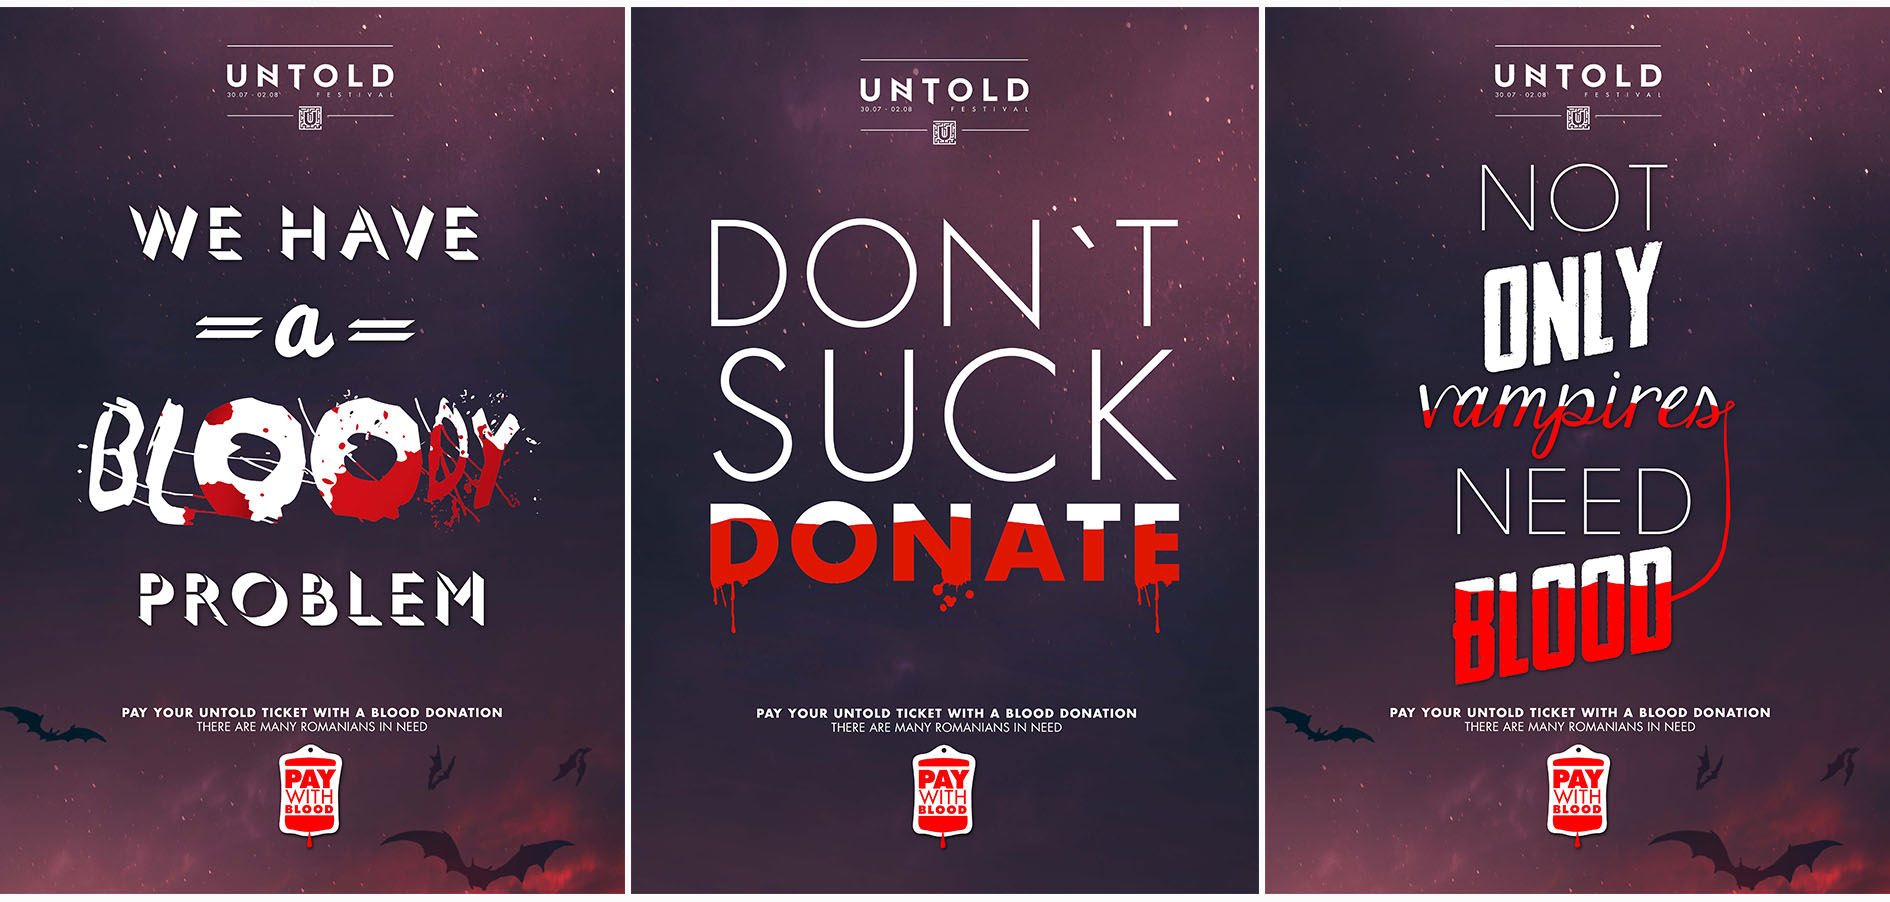 Pay with blood Untold Posters